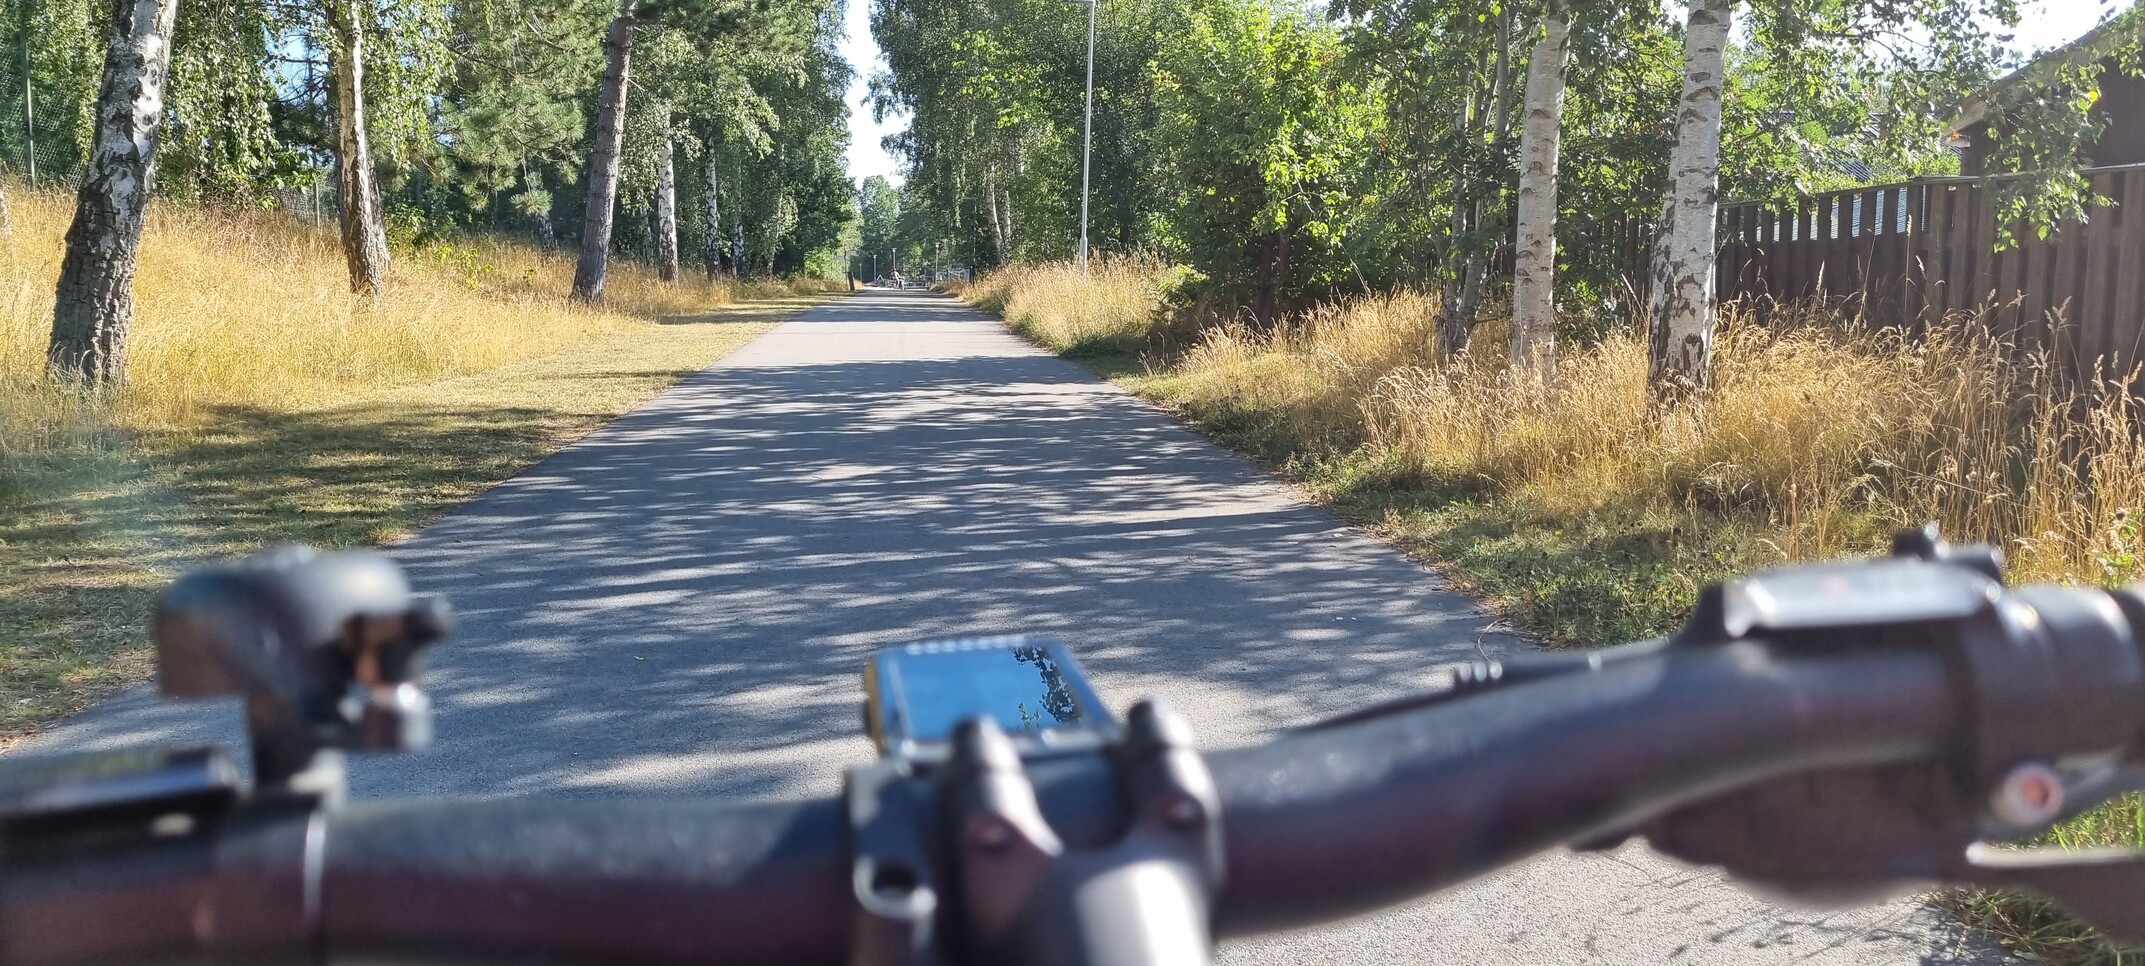 The front of my bike on a rode with trees on either side.